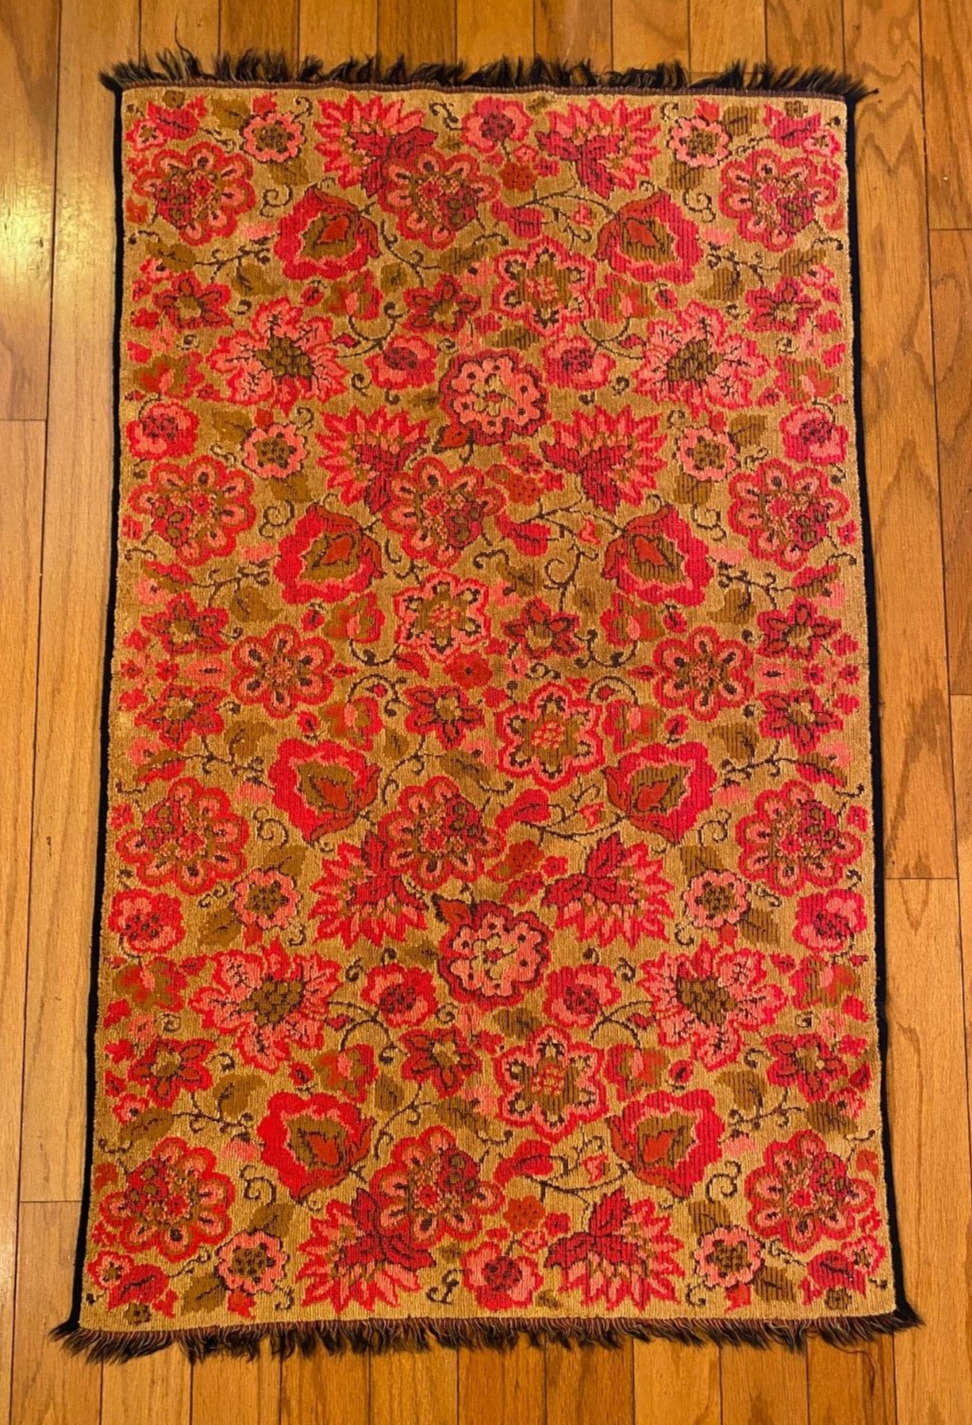 Vintage CANNON Royal Family BATH TOWEL Jacobean Floral PINK GOLD Red Brown Rare